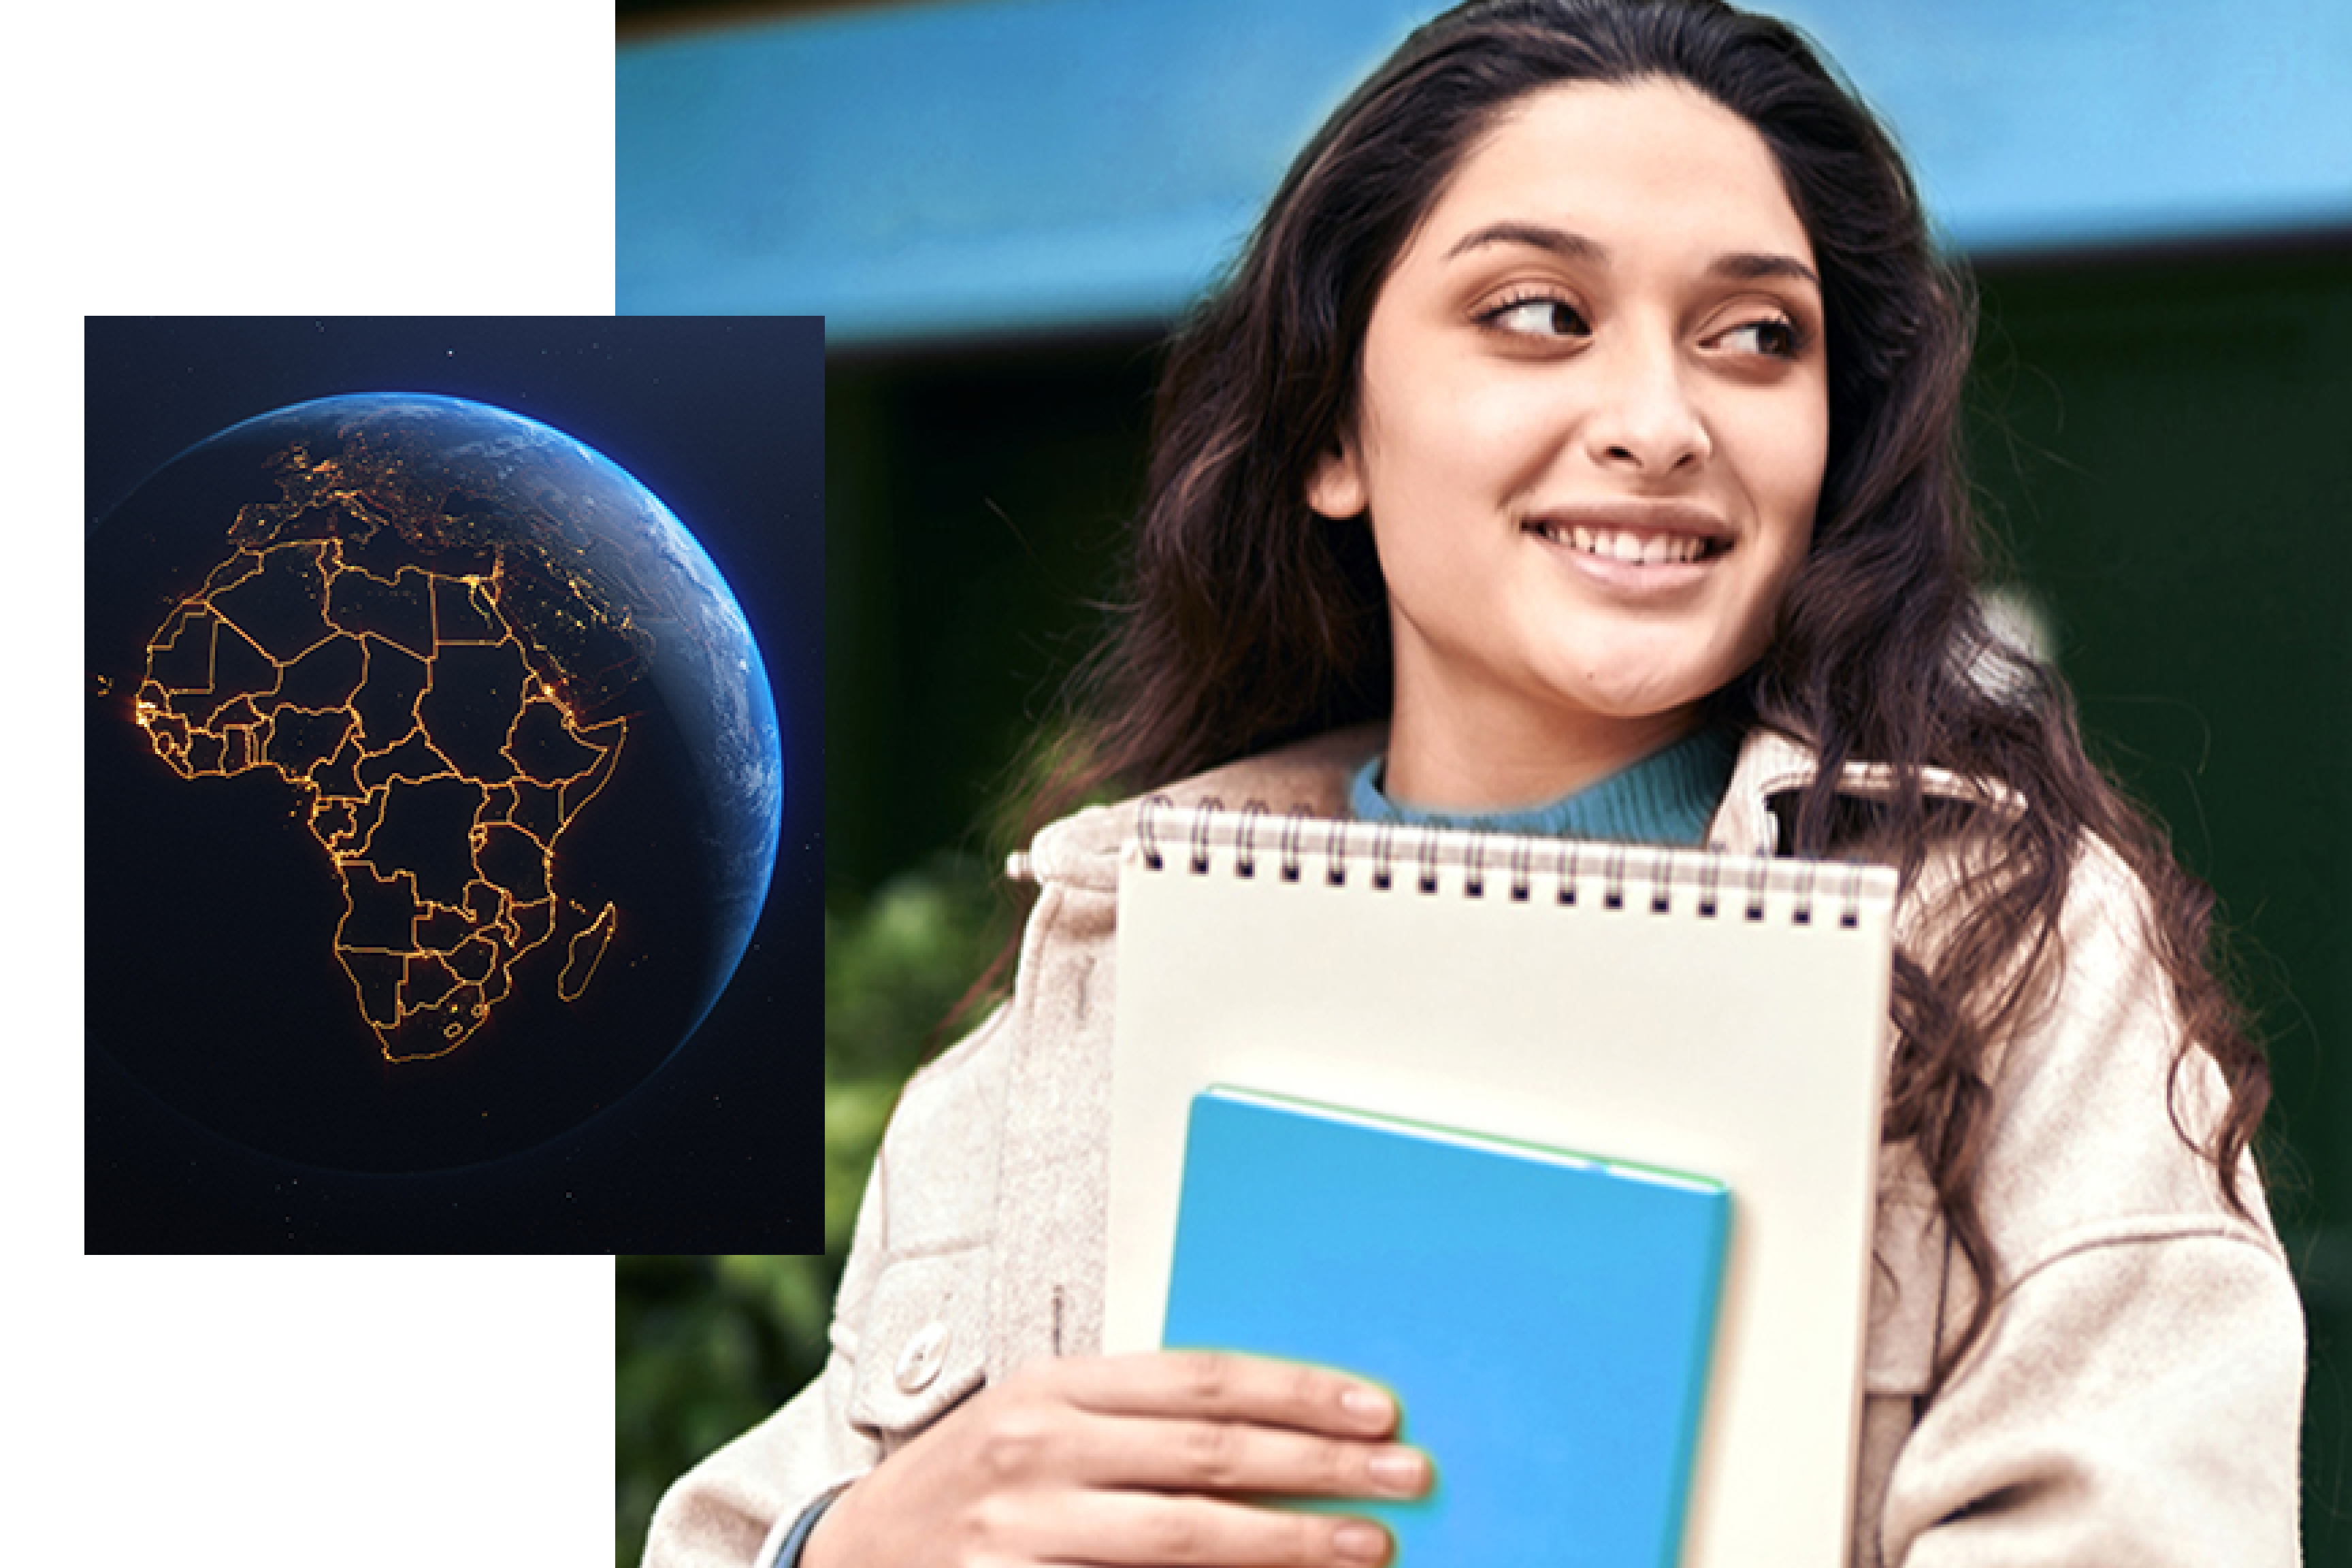 Student smiling and holding pads of paper, alongside a map of Africa and the Middle East